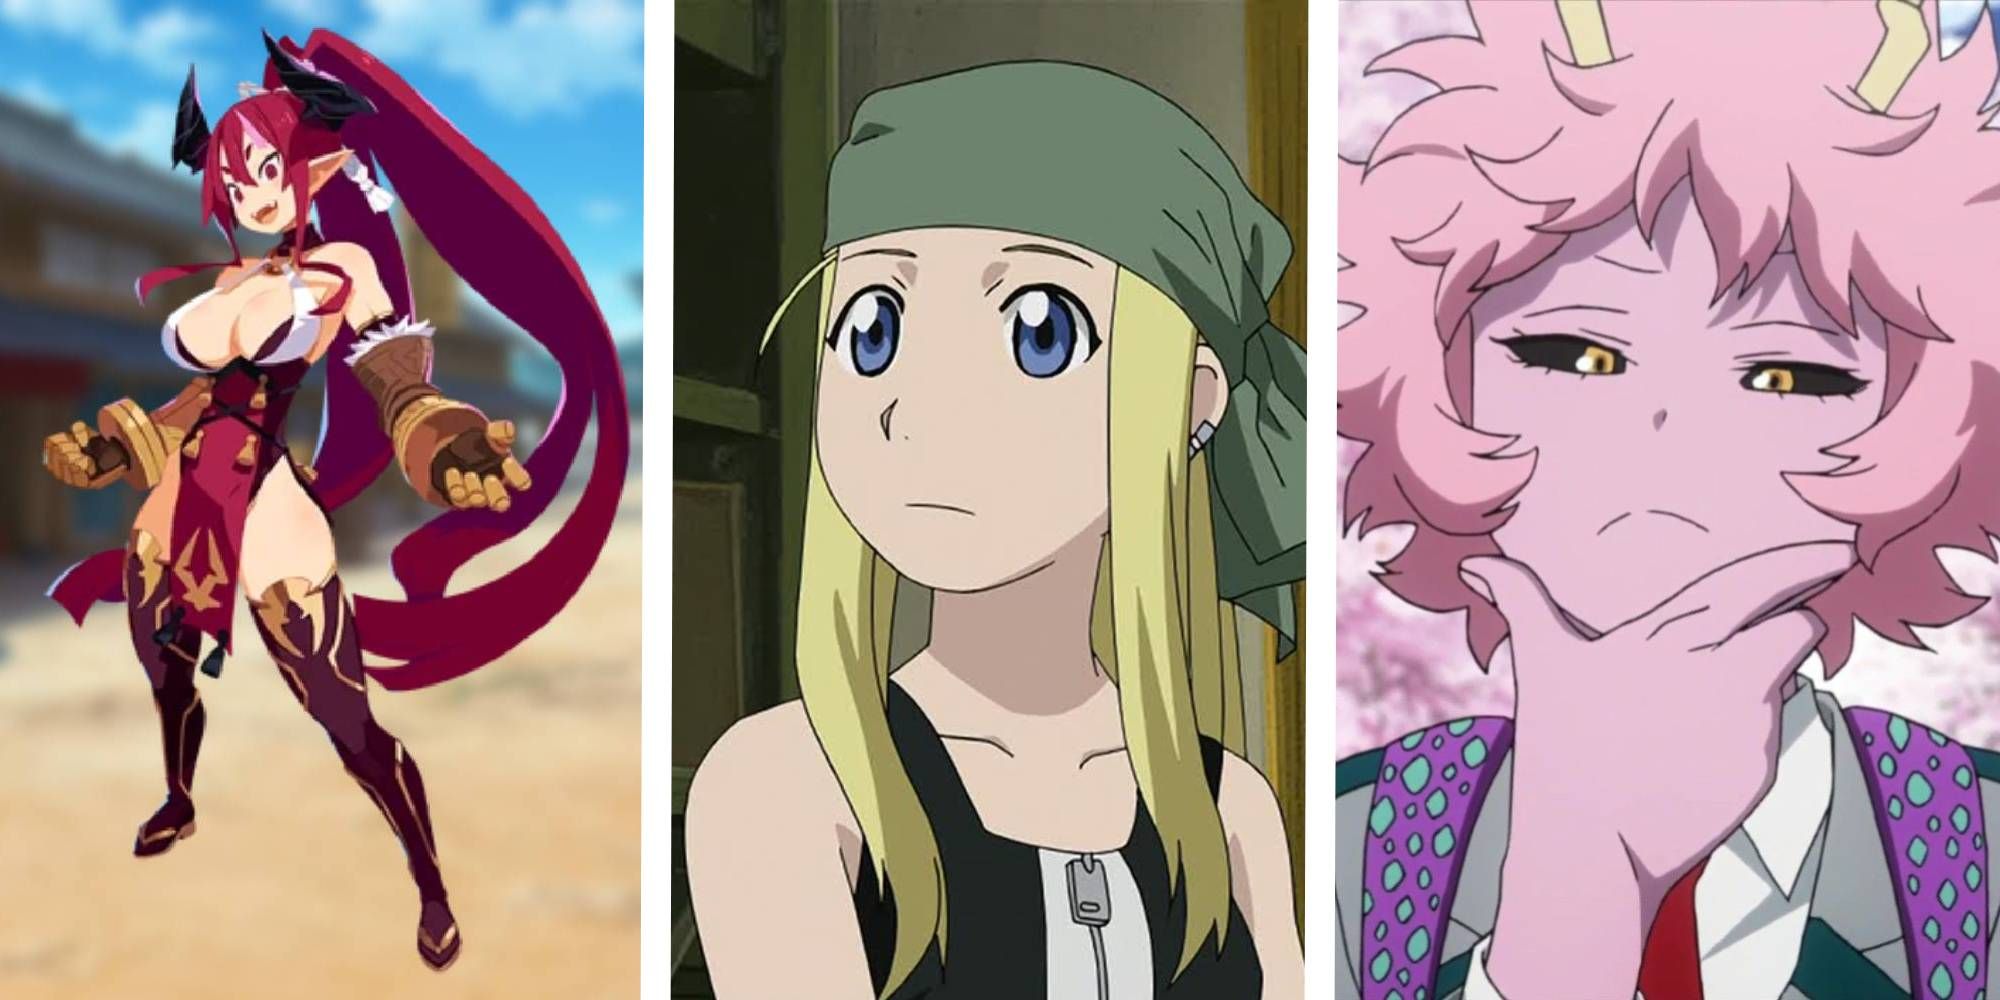 Higan Zesshosai and Caitlan Glass Roles, Winry, and Mina